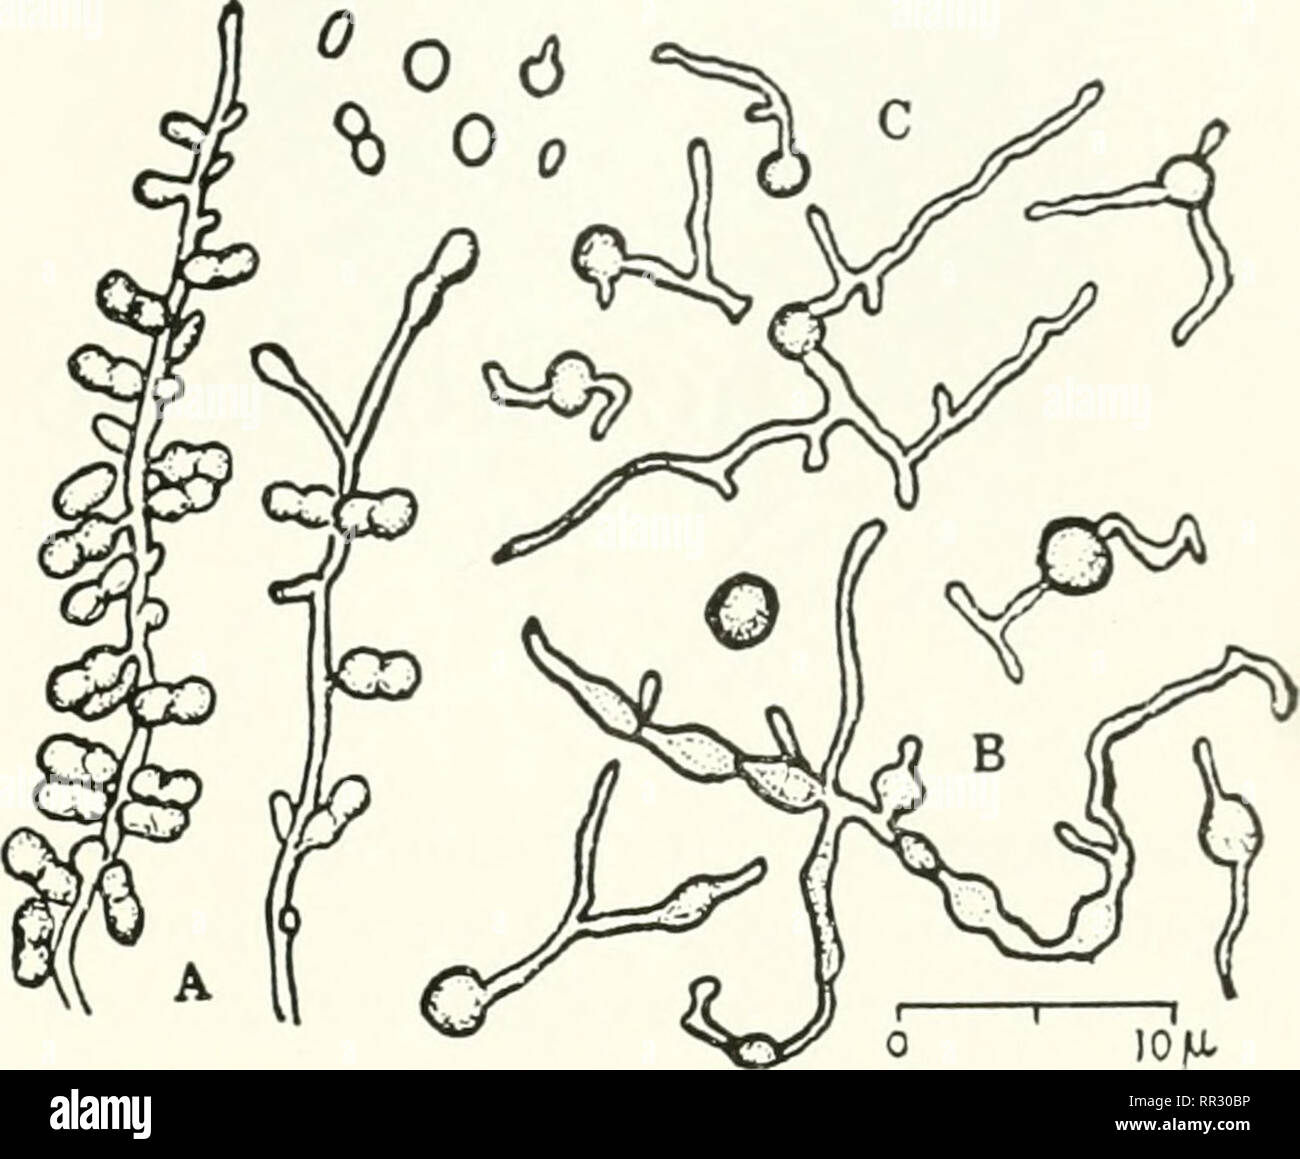 . The actinomycetes. Actinomycetales. h*J$** Figure 56. Waksmania rosea, schematic repre- sentation of the formation of aerial mycelium and spores (Reproduced from: Lechevalier, M. P. and Lechevalier, H. J. Gen. Microbiol. 17:108, 1957). 4^1. 0 10/lt Figure 57. Waksmania (Microbispora) rosea: A. sporulation; B. chlamydospores; C. germination of conidia (Reproduced from: Xonomura, H. and Ohara, Y. J. Fermentation Technol. 35:307, 1957). recently isolated by Louria and Gordon (I960). Remarks: Thiamine and biotin are es- sential for growth; biotin also controls pig- mentation. Ammonium compounds, Stock Photo